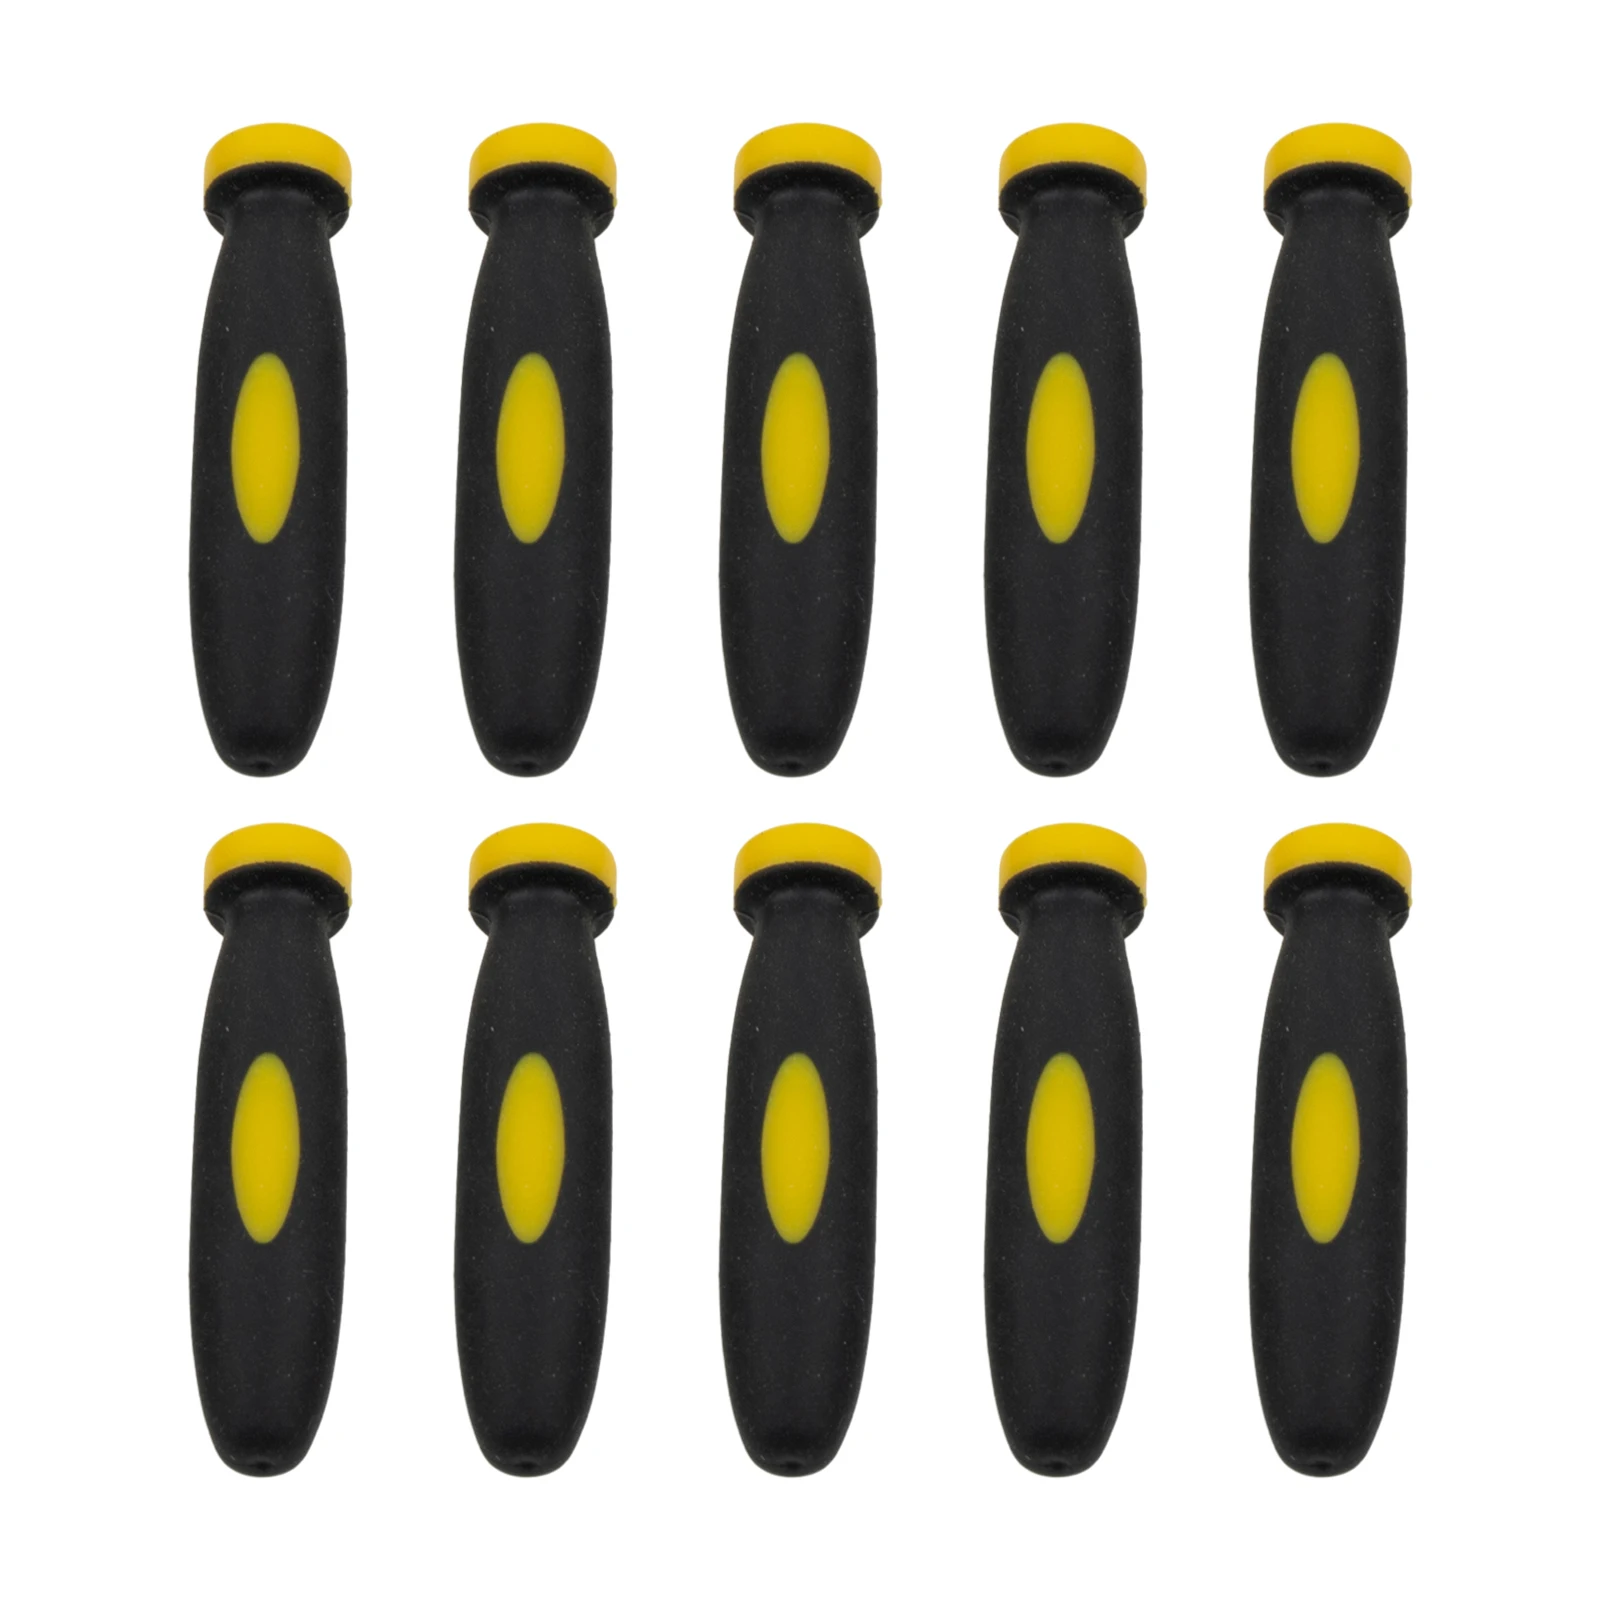 

10pcs Rubber Files Handles 3mm Hole Diameter Woodworking File Handles 2.36x0.19 Inch For Small Files Handle Hand Tools